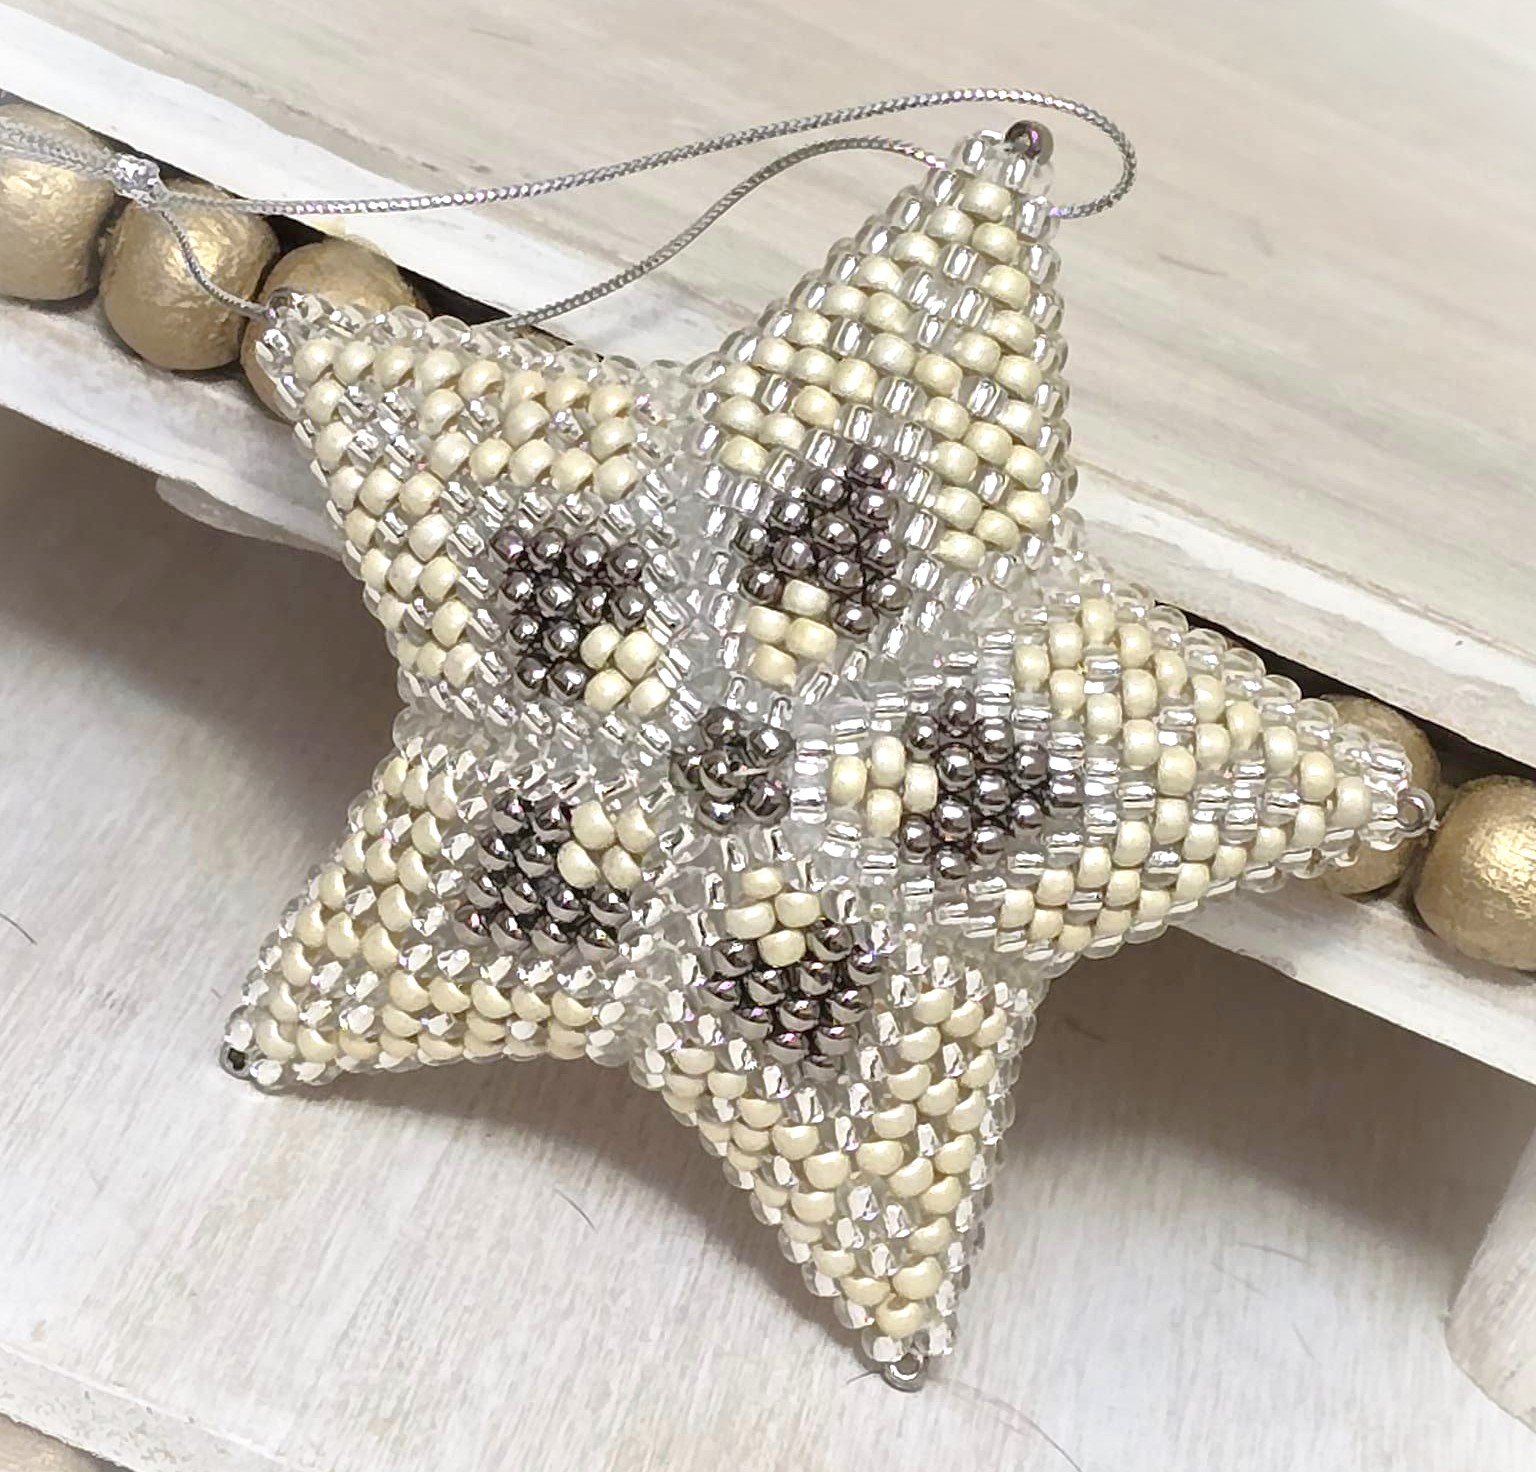 Handmade Beaded 3D Star Ornament, Glass Christmas Tree ornament, ivory, white and silver